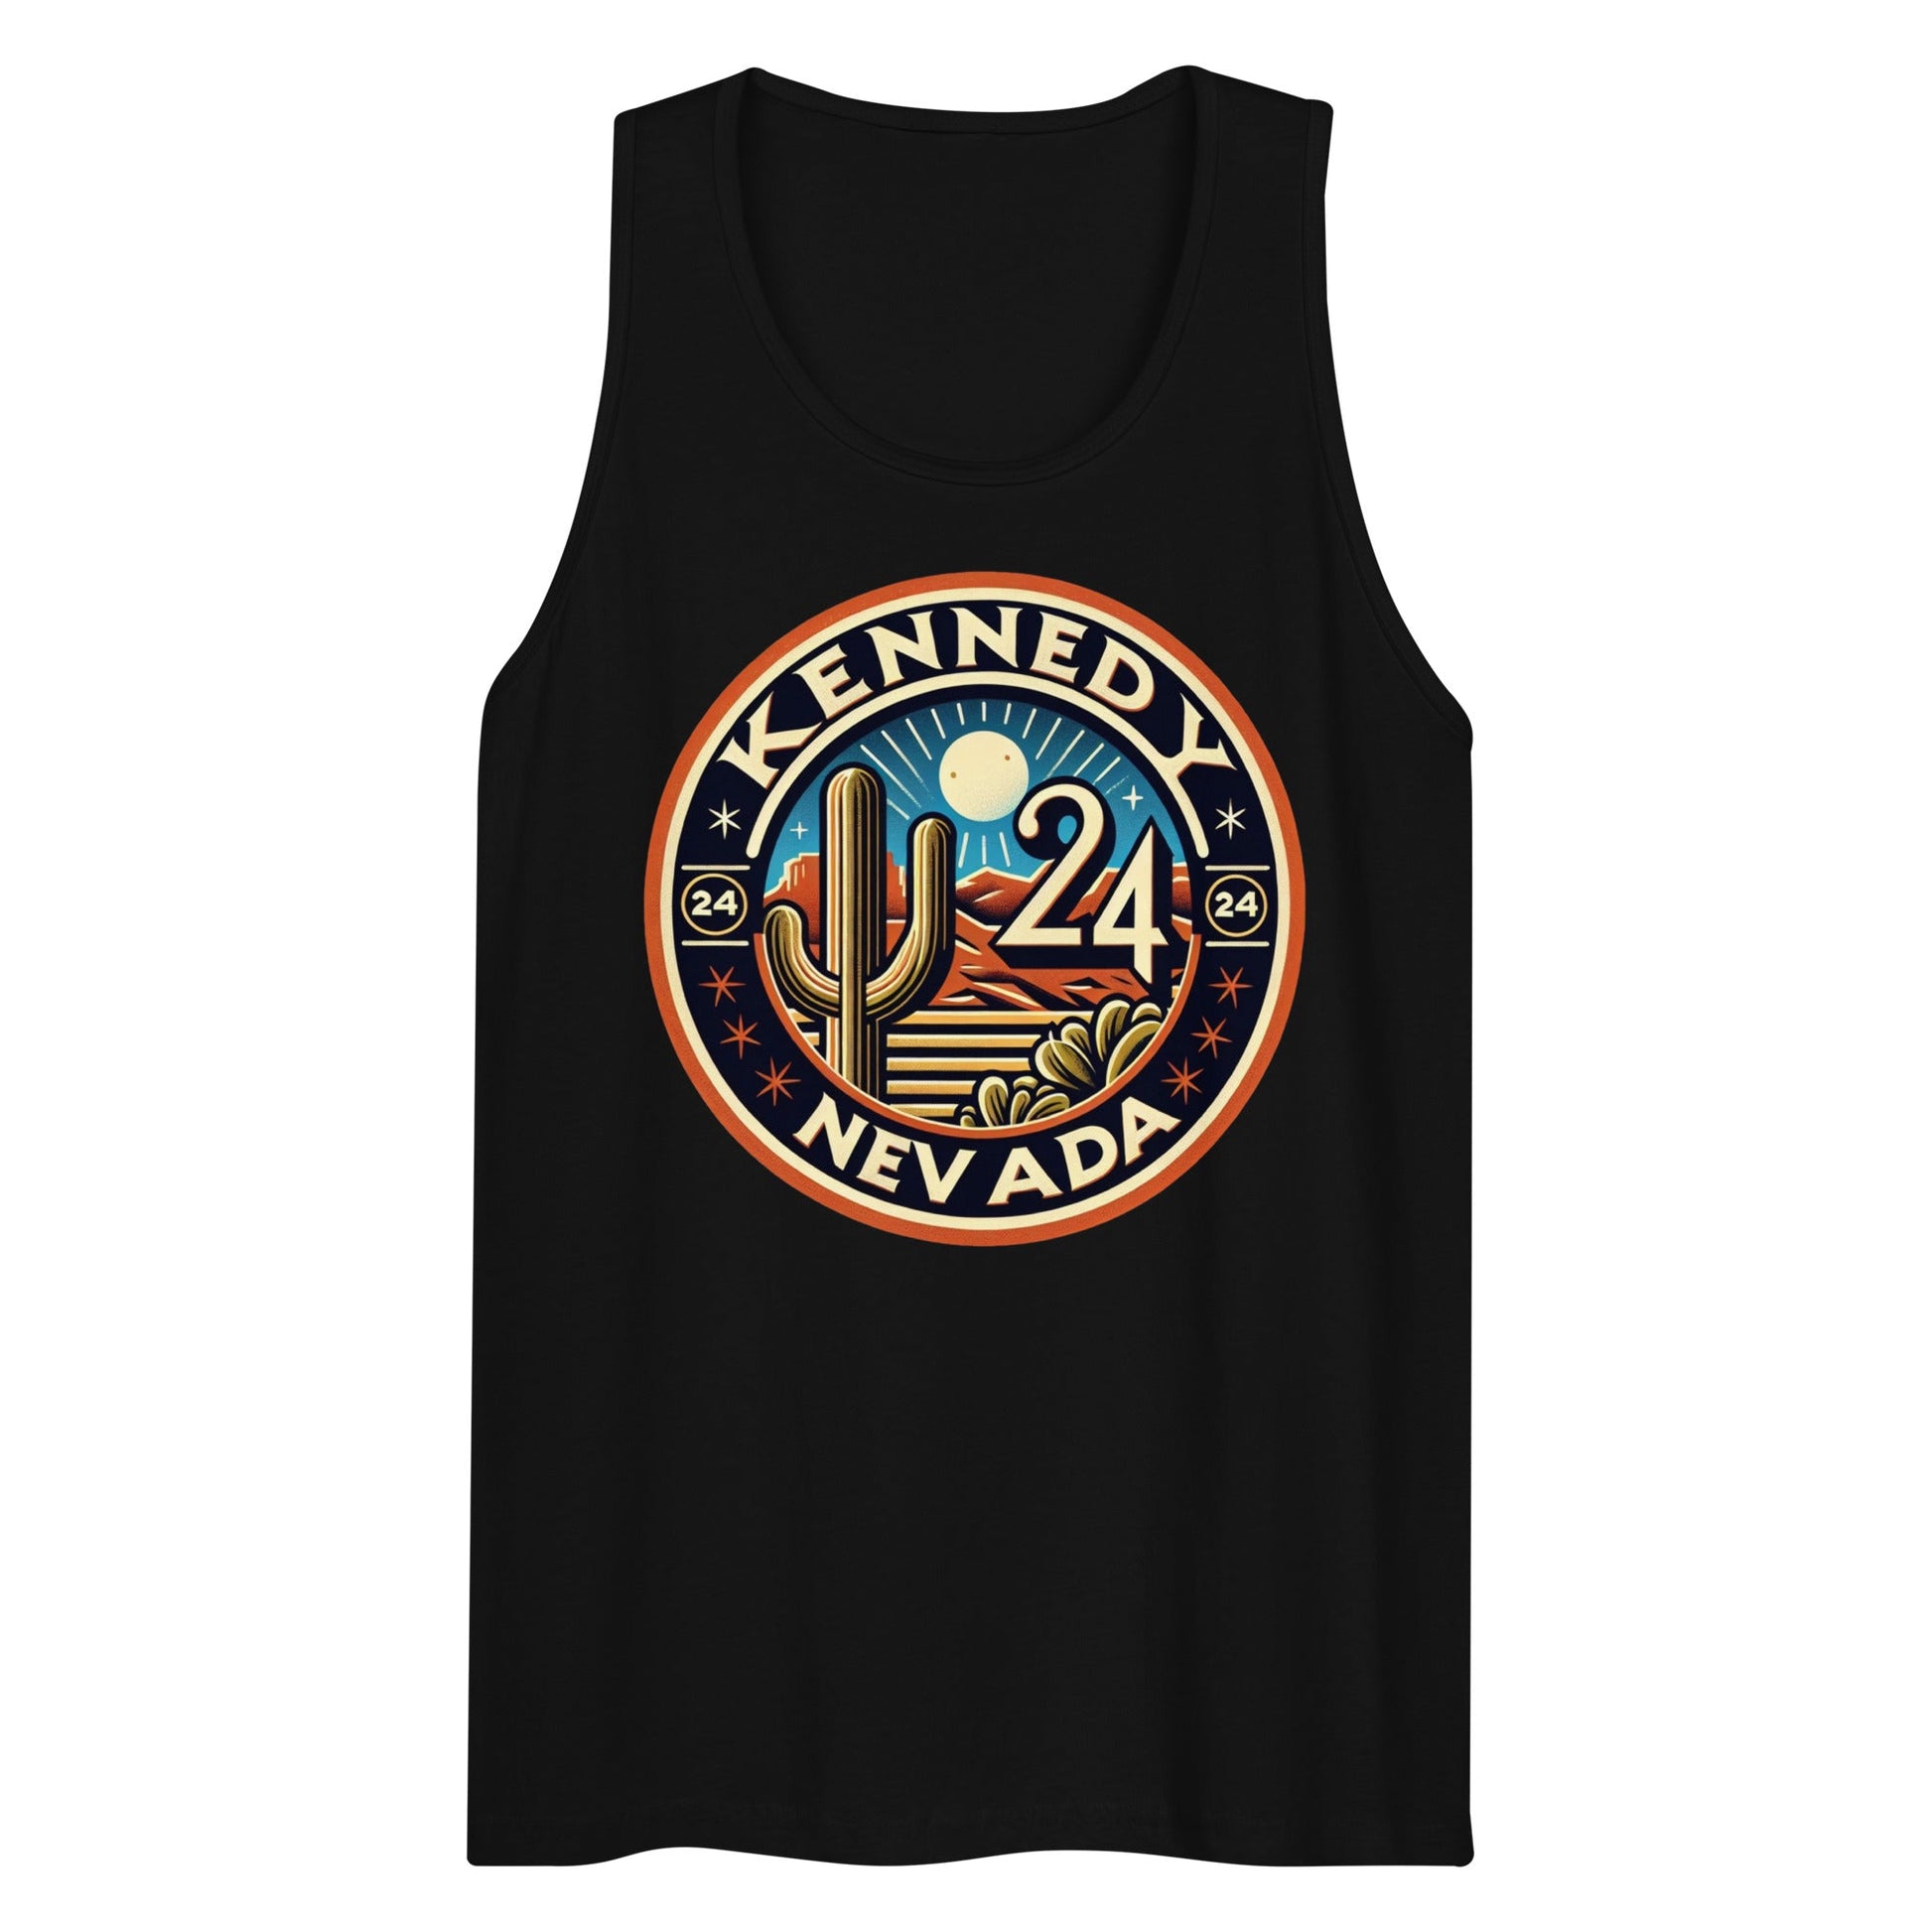 Nevada Kennedy Black Tank Top - TEAM KENNEDY. All rights reserved